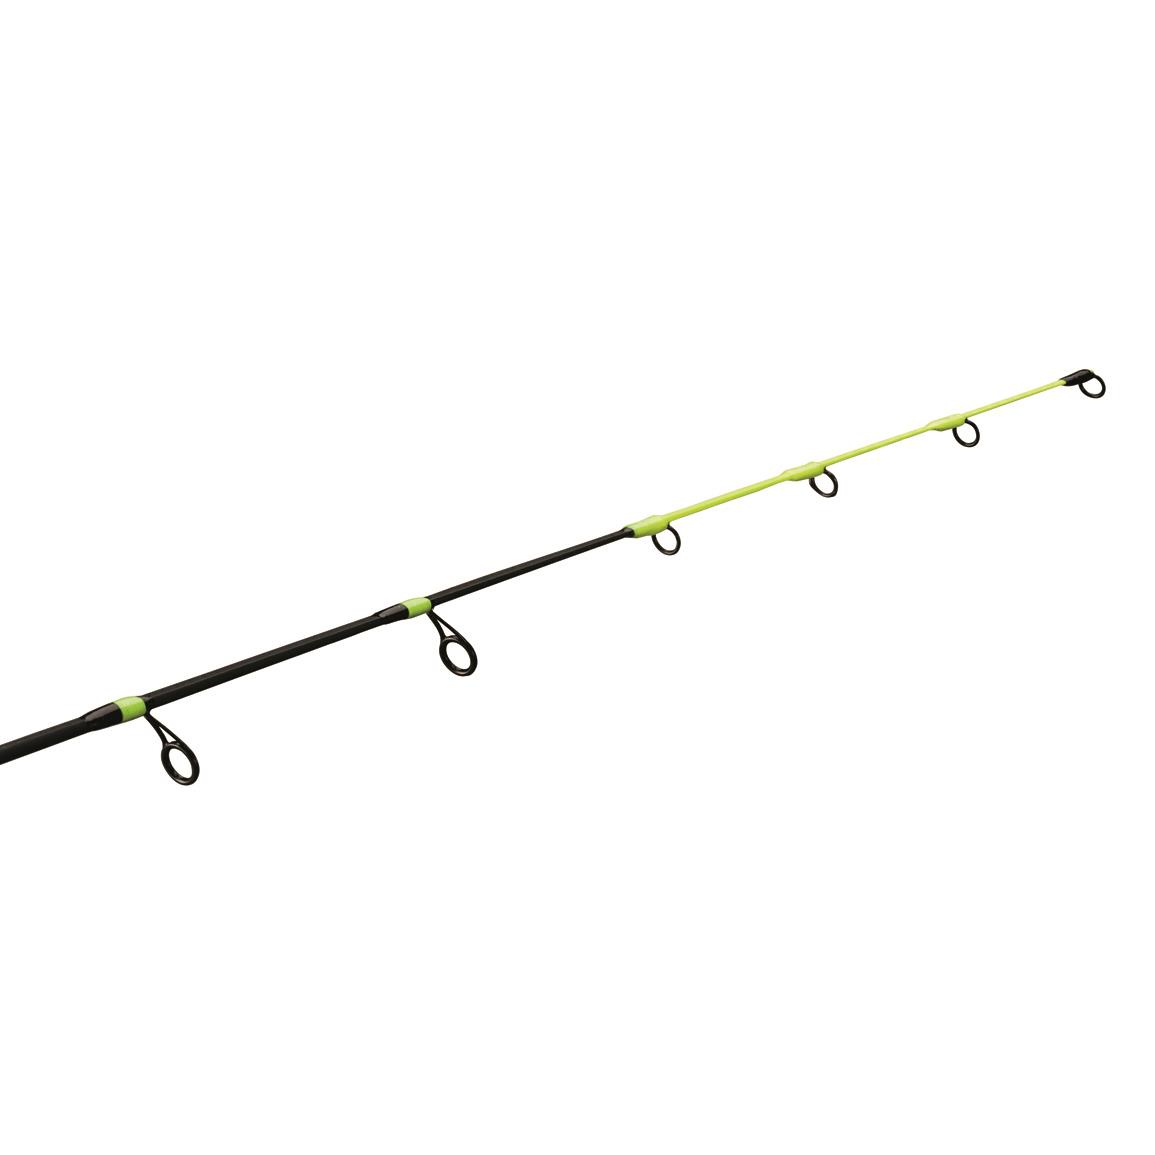 Clam Ice Rod Slick, 2 Pack - 724058, Ice Fishing Rods at